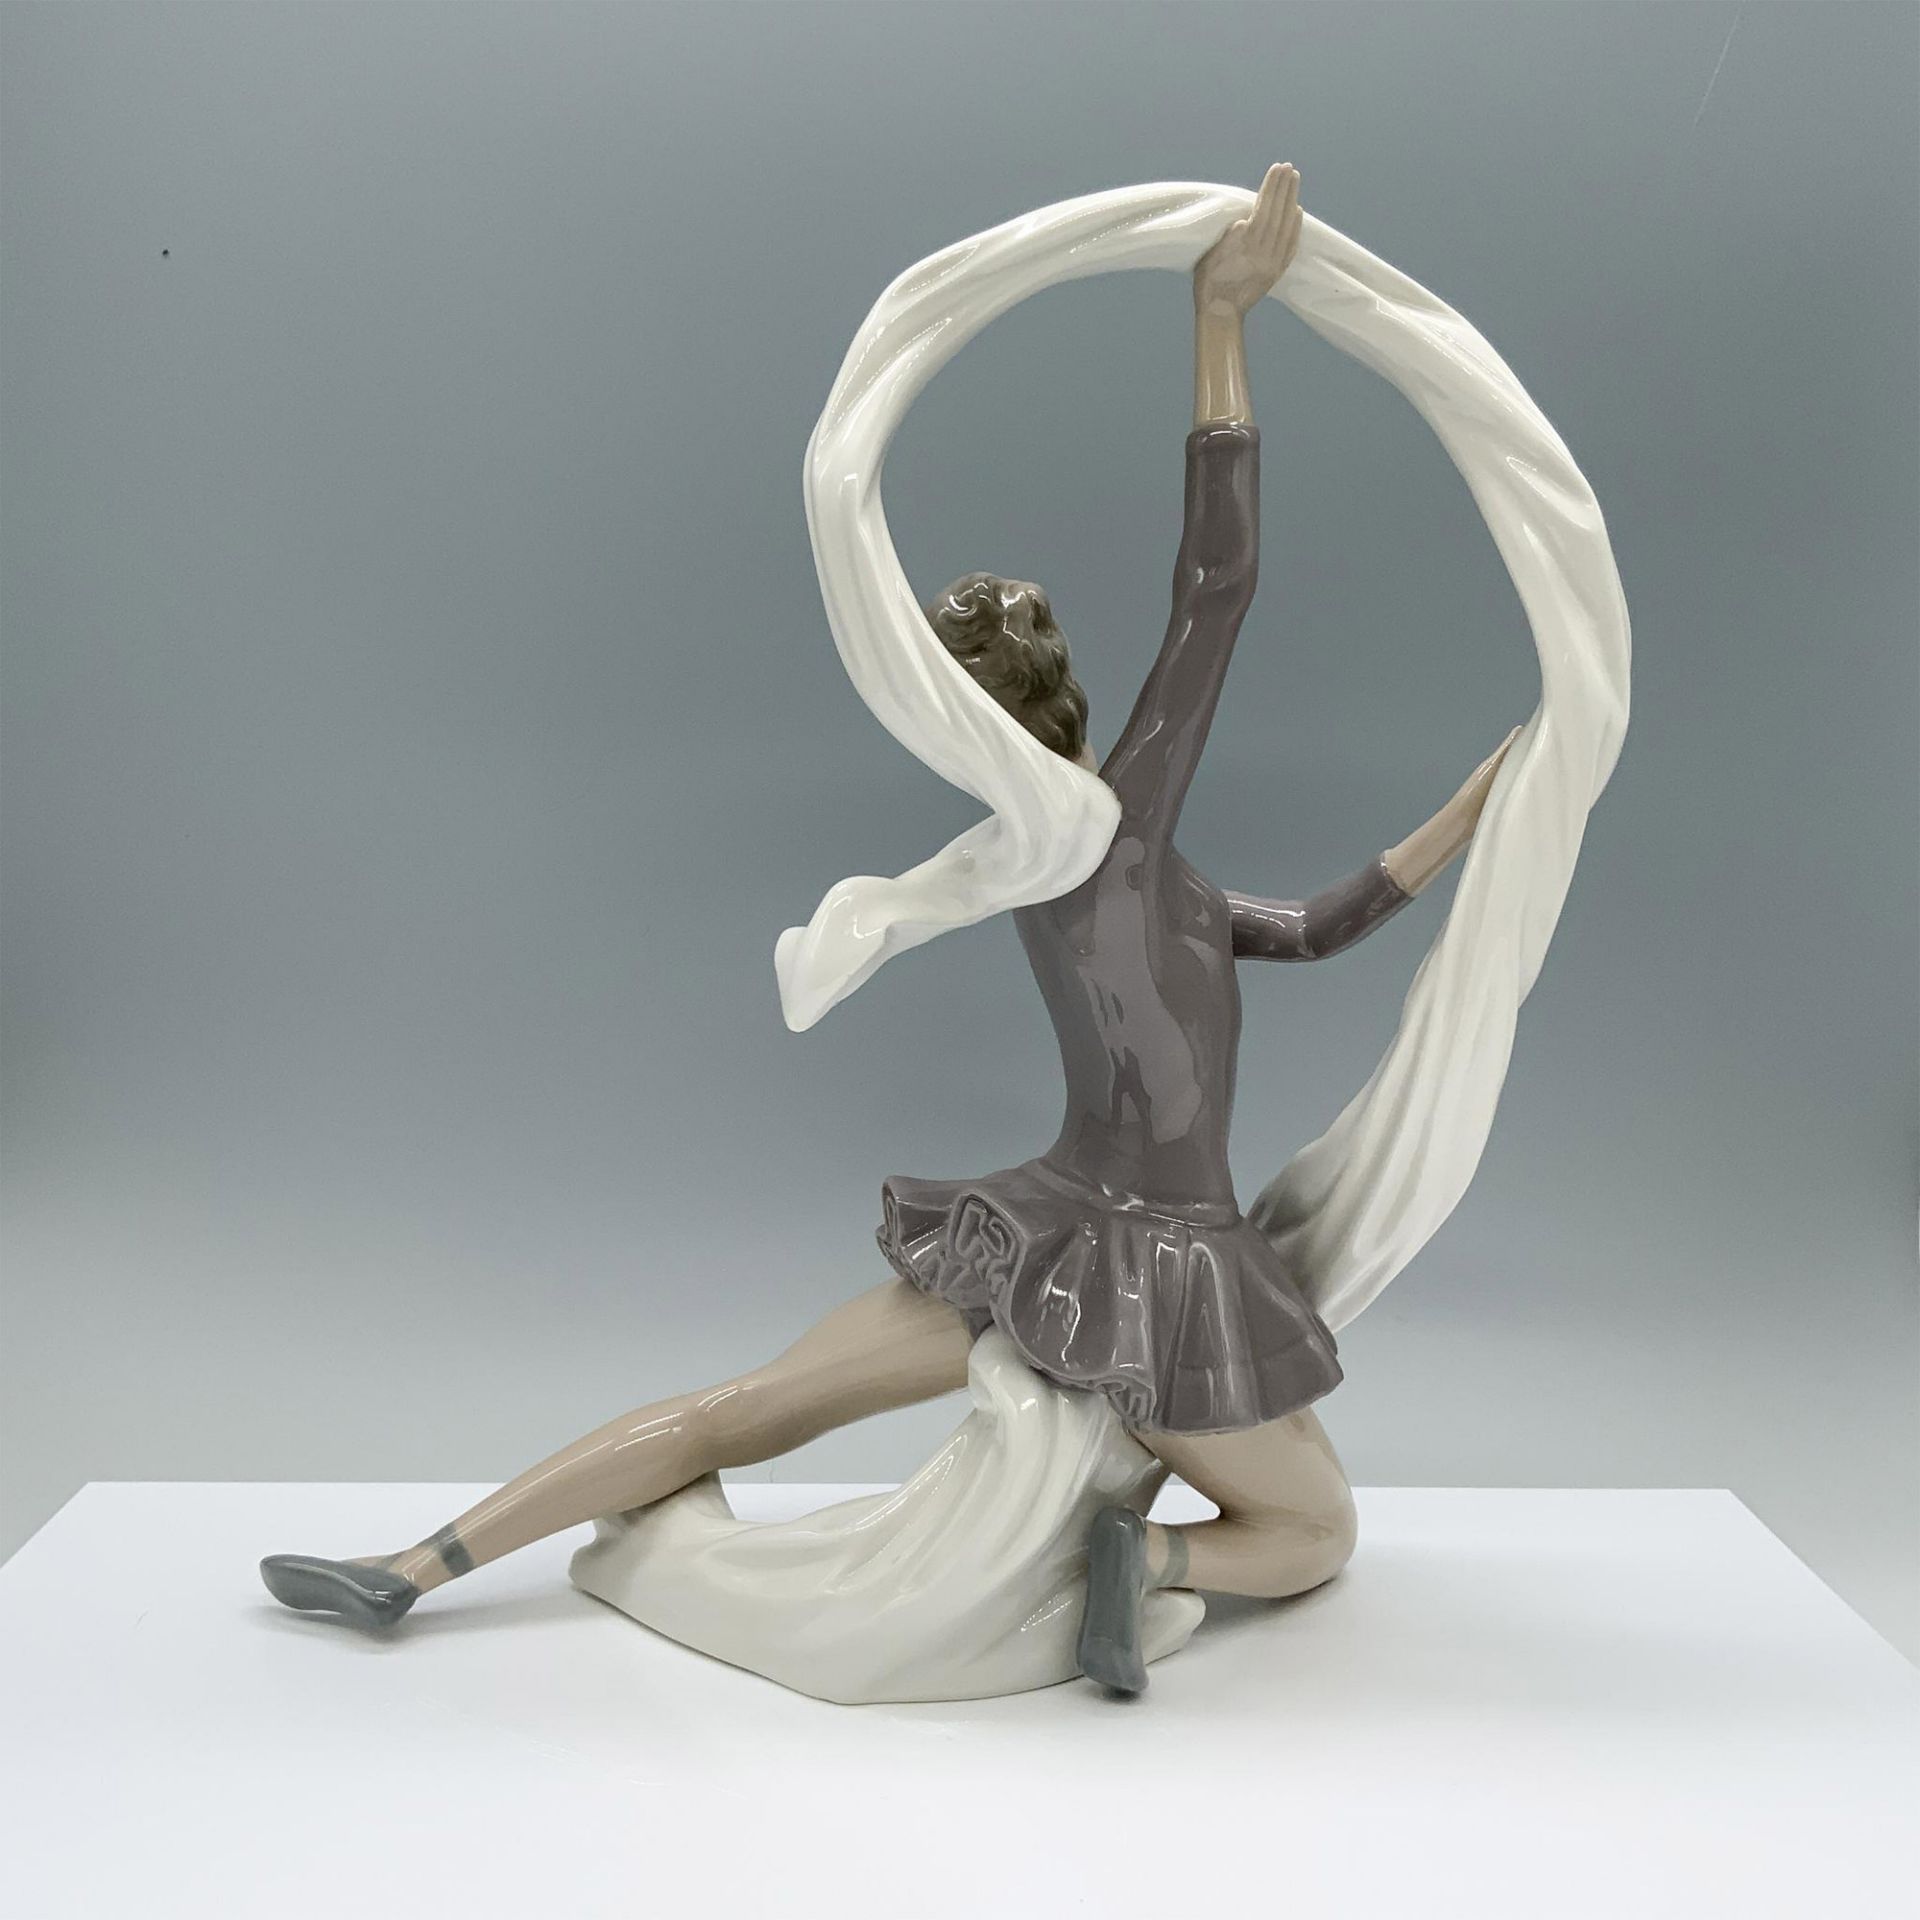 Nao by Lladro Figurine, Dancer with Veil 2012010 - Image 2 of 3